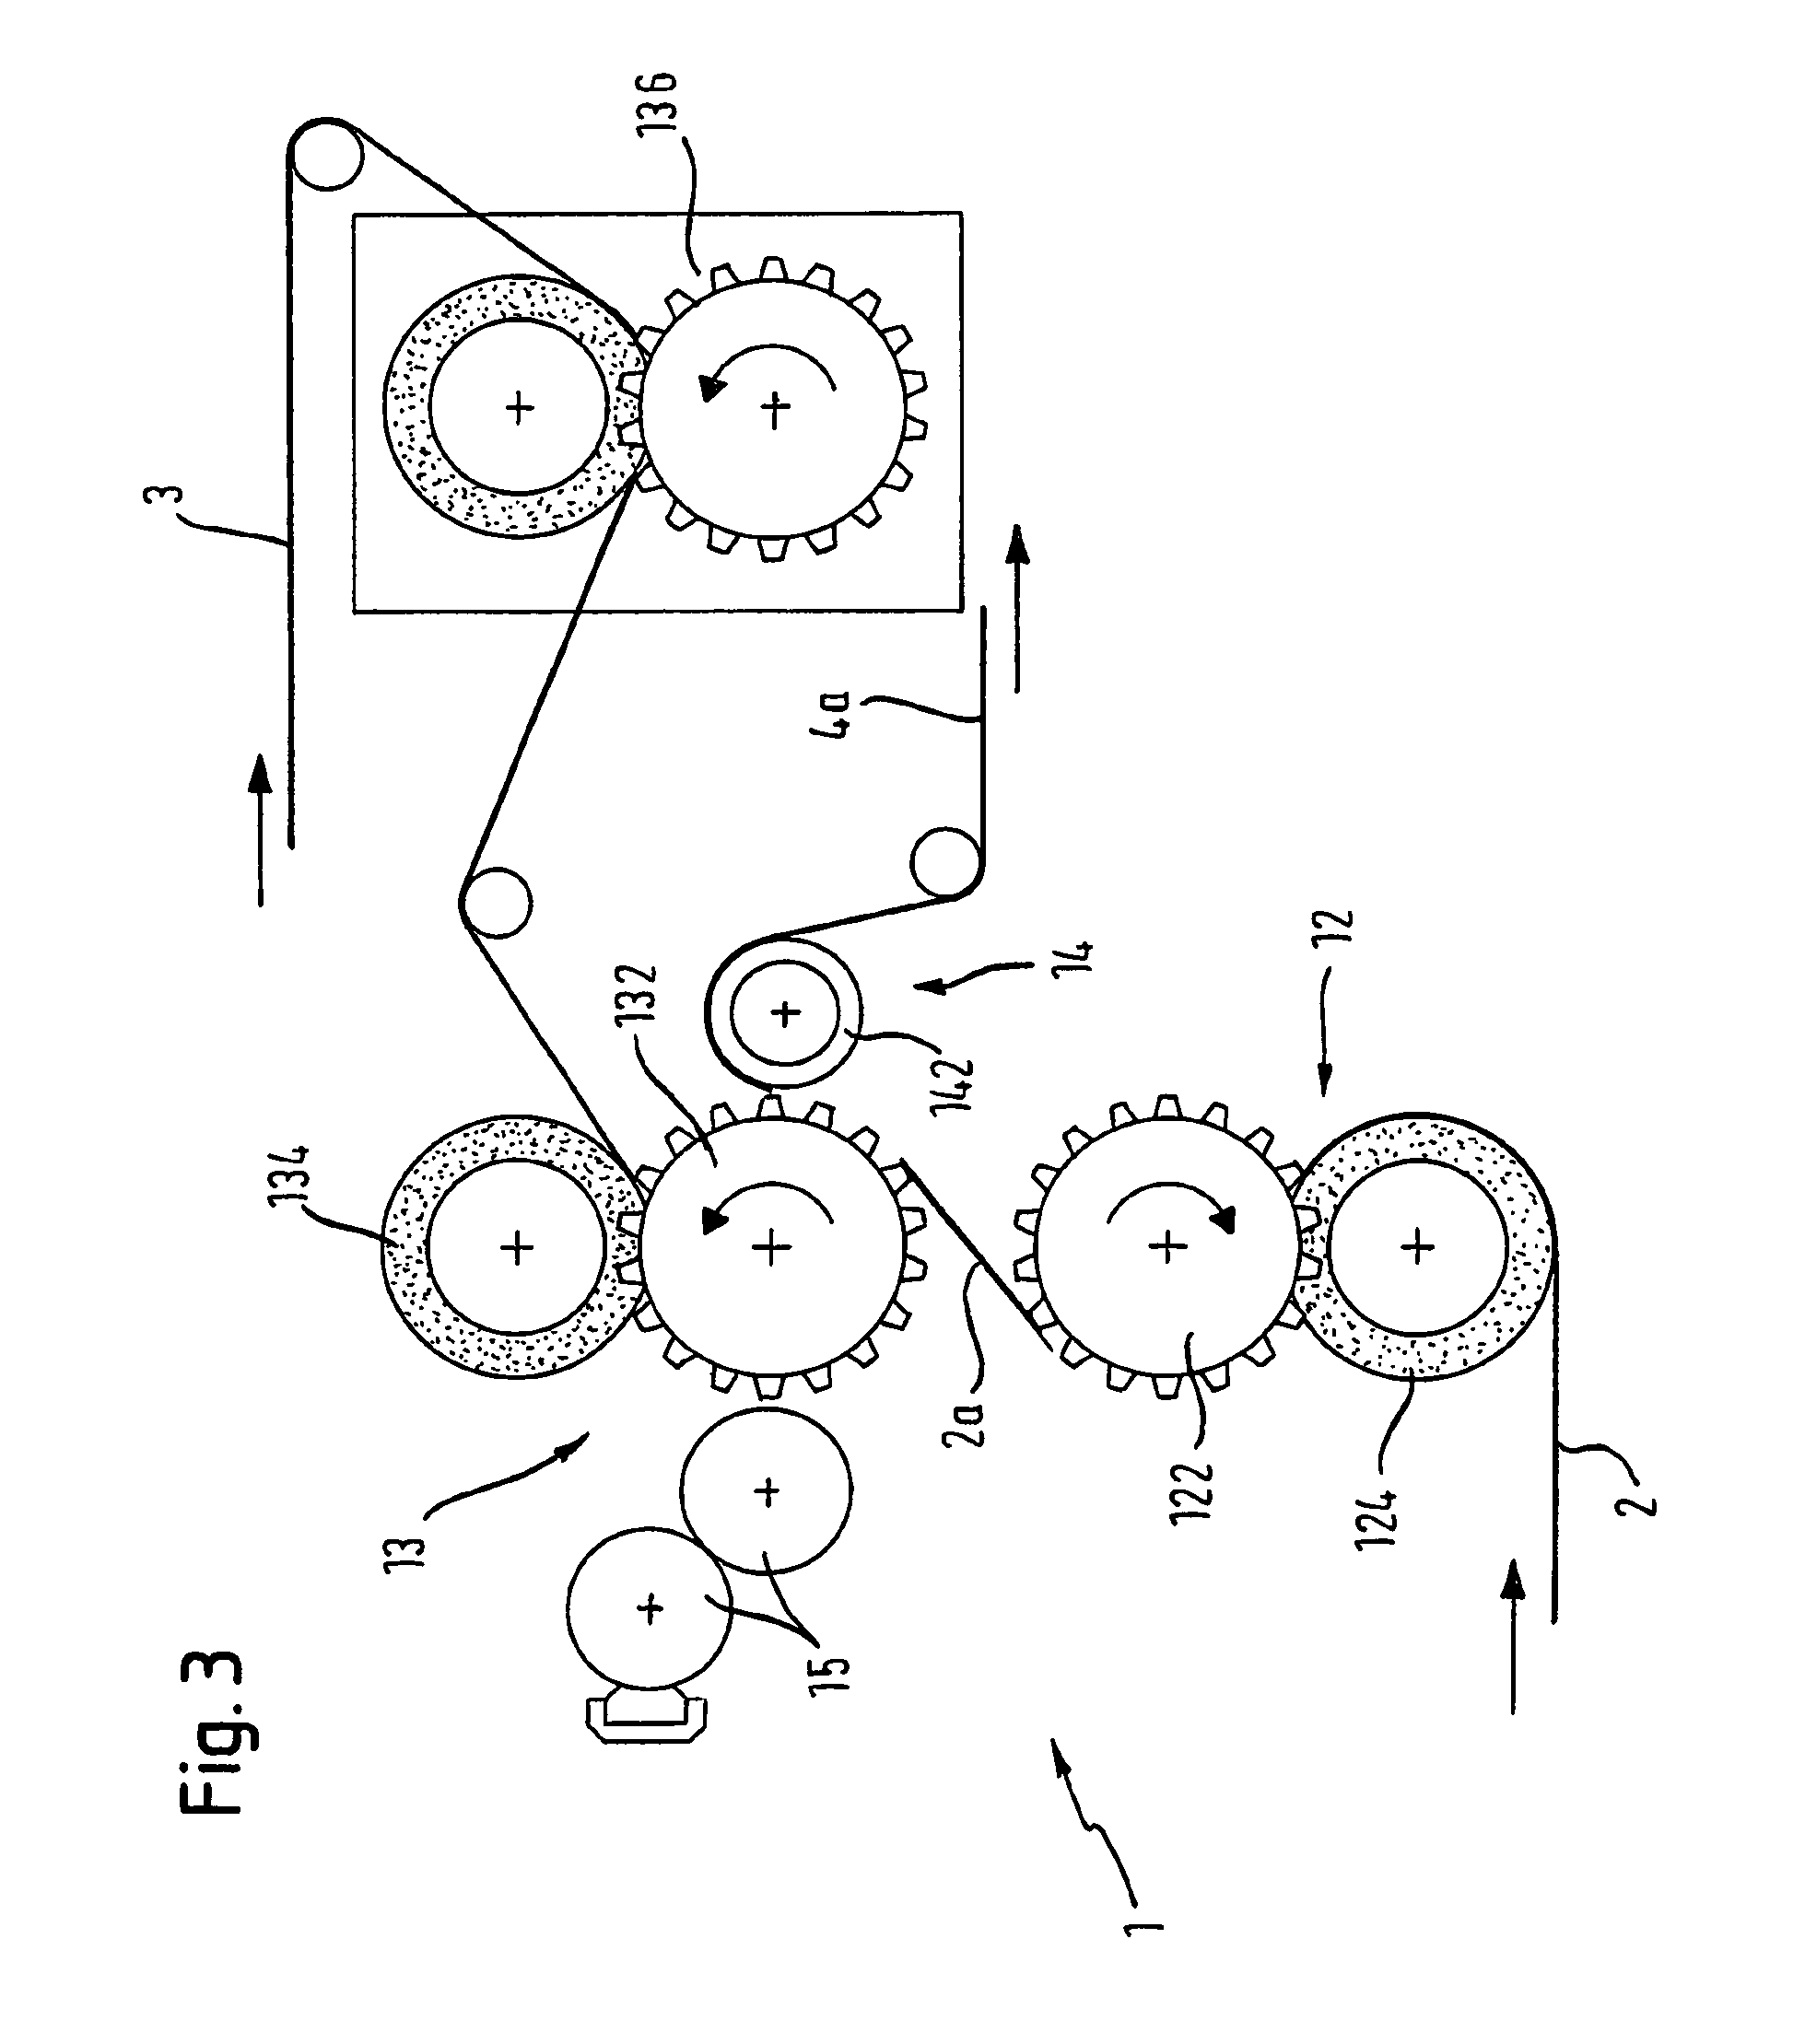 Multi-ply tissue paper, paper converting device and method for producing a multi-ply tissue paper